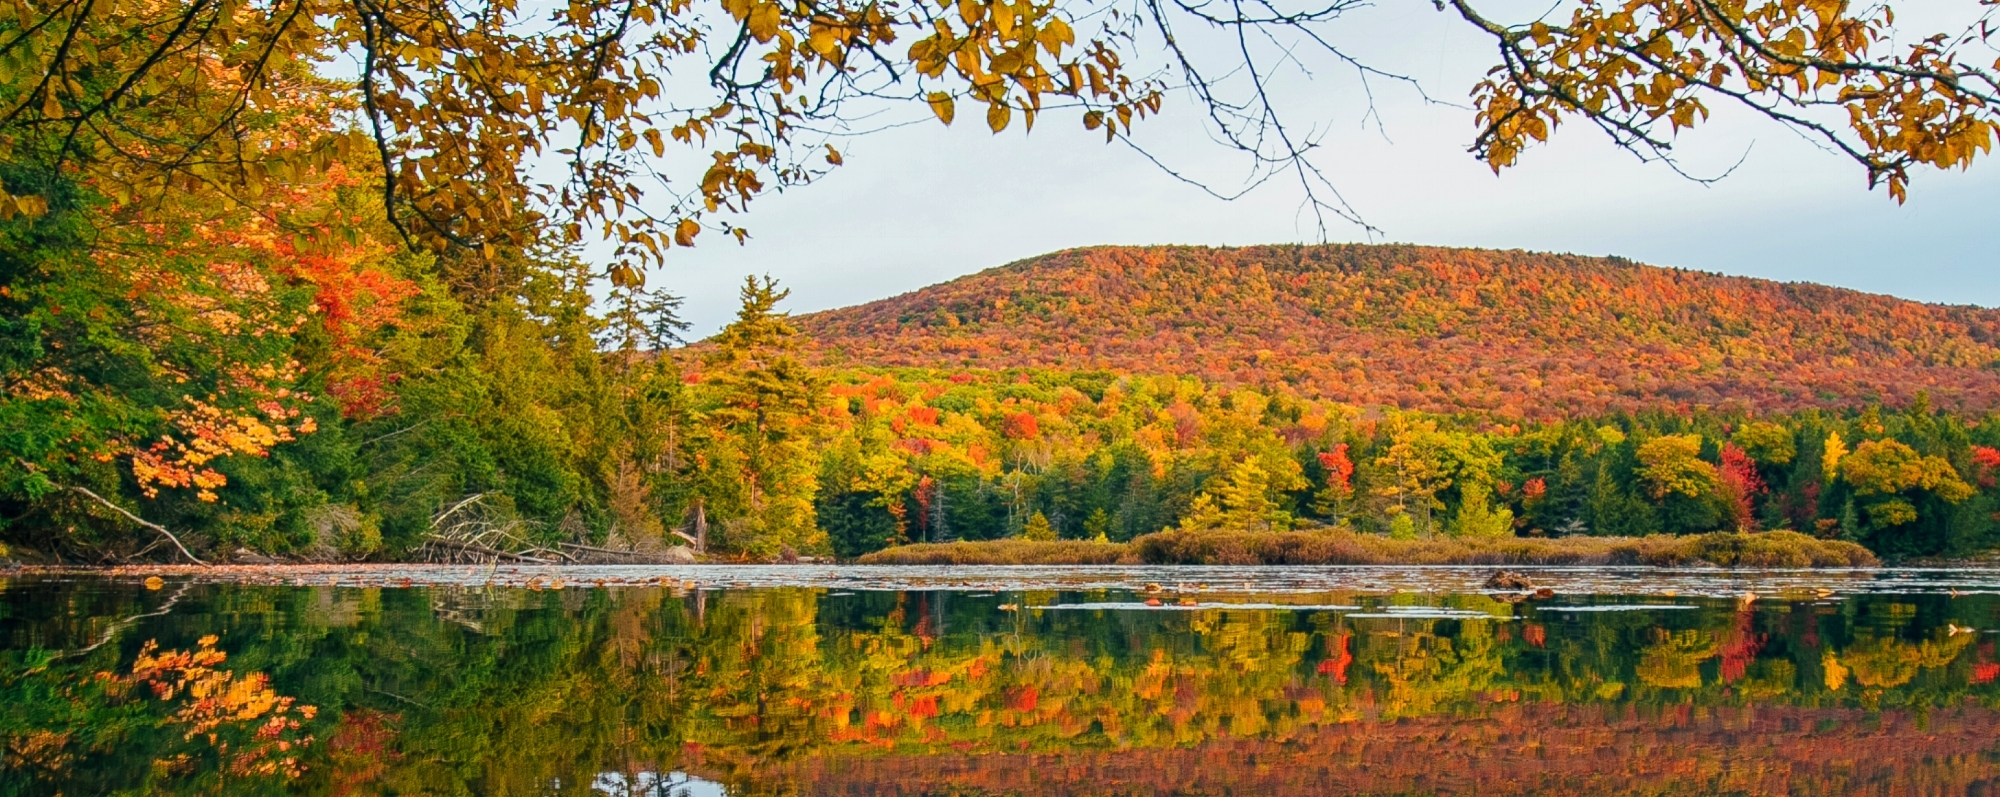 How to get to The Catskills, United States?